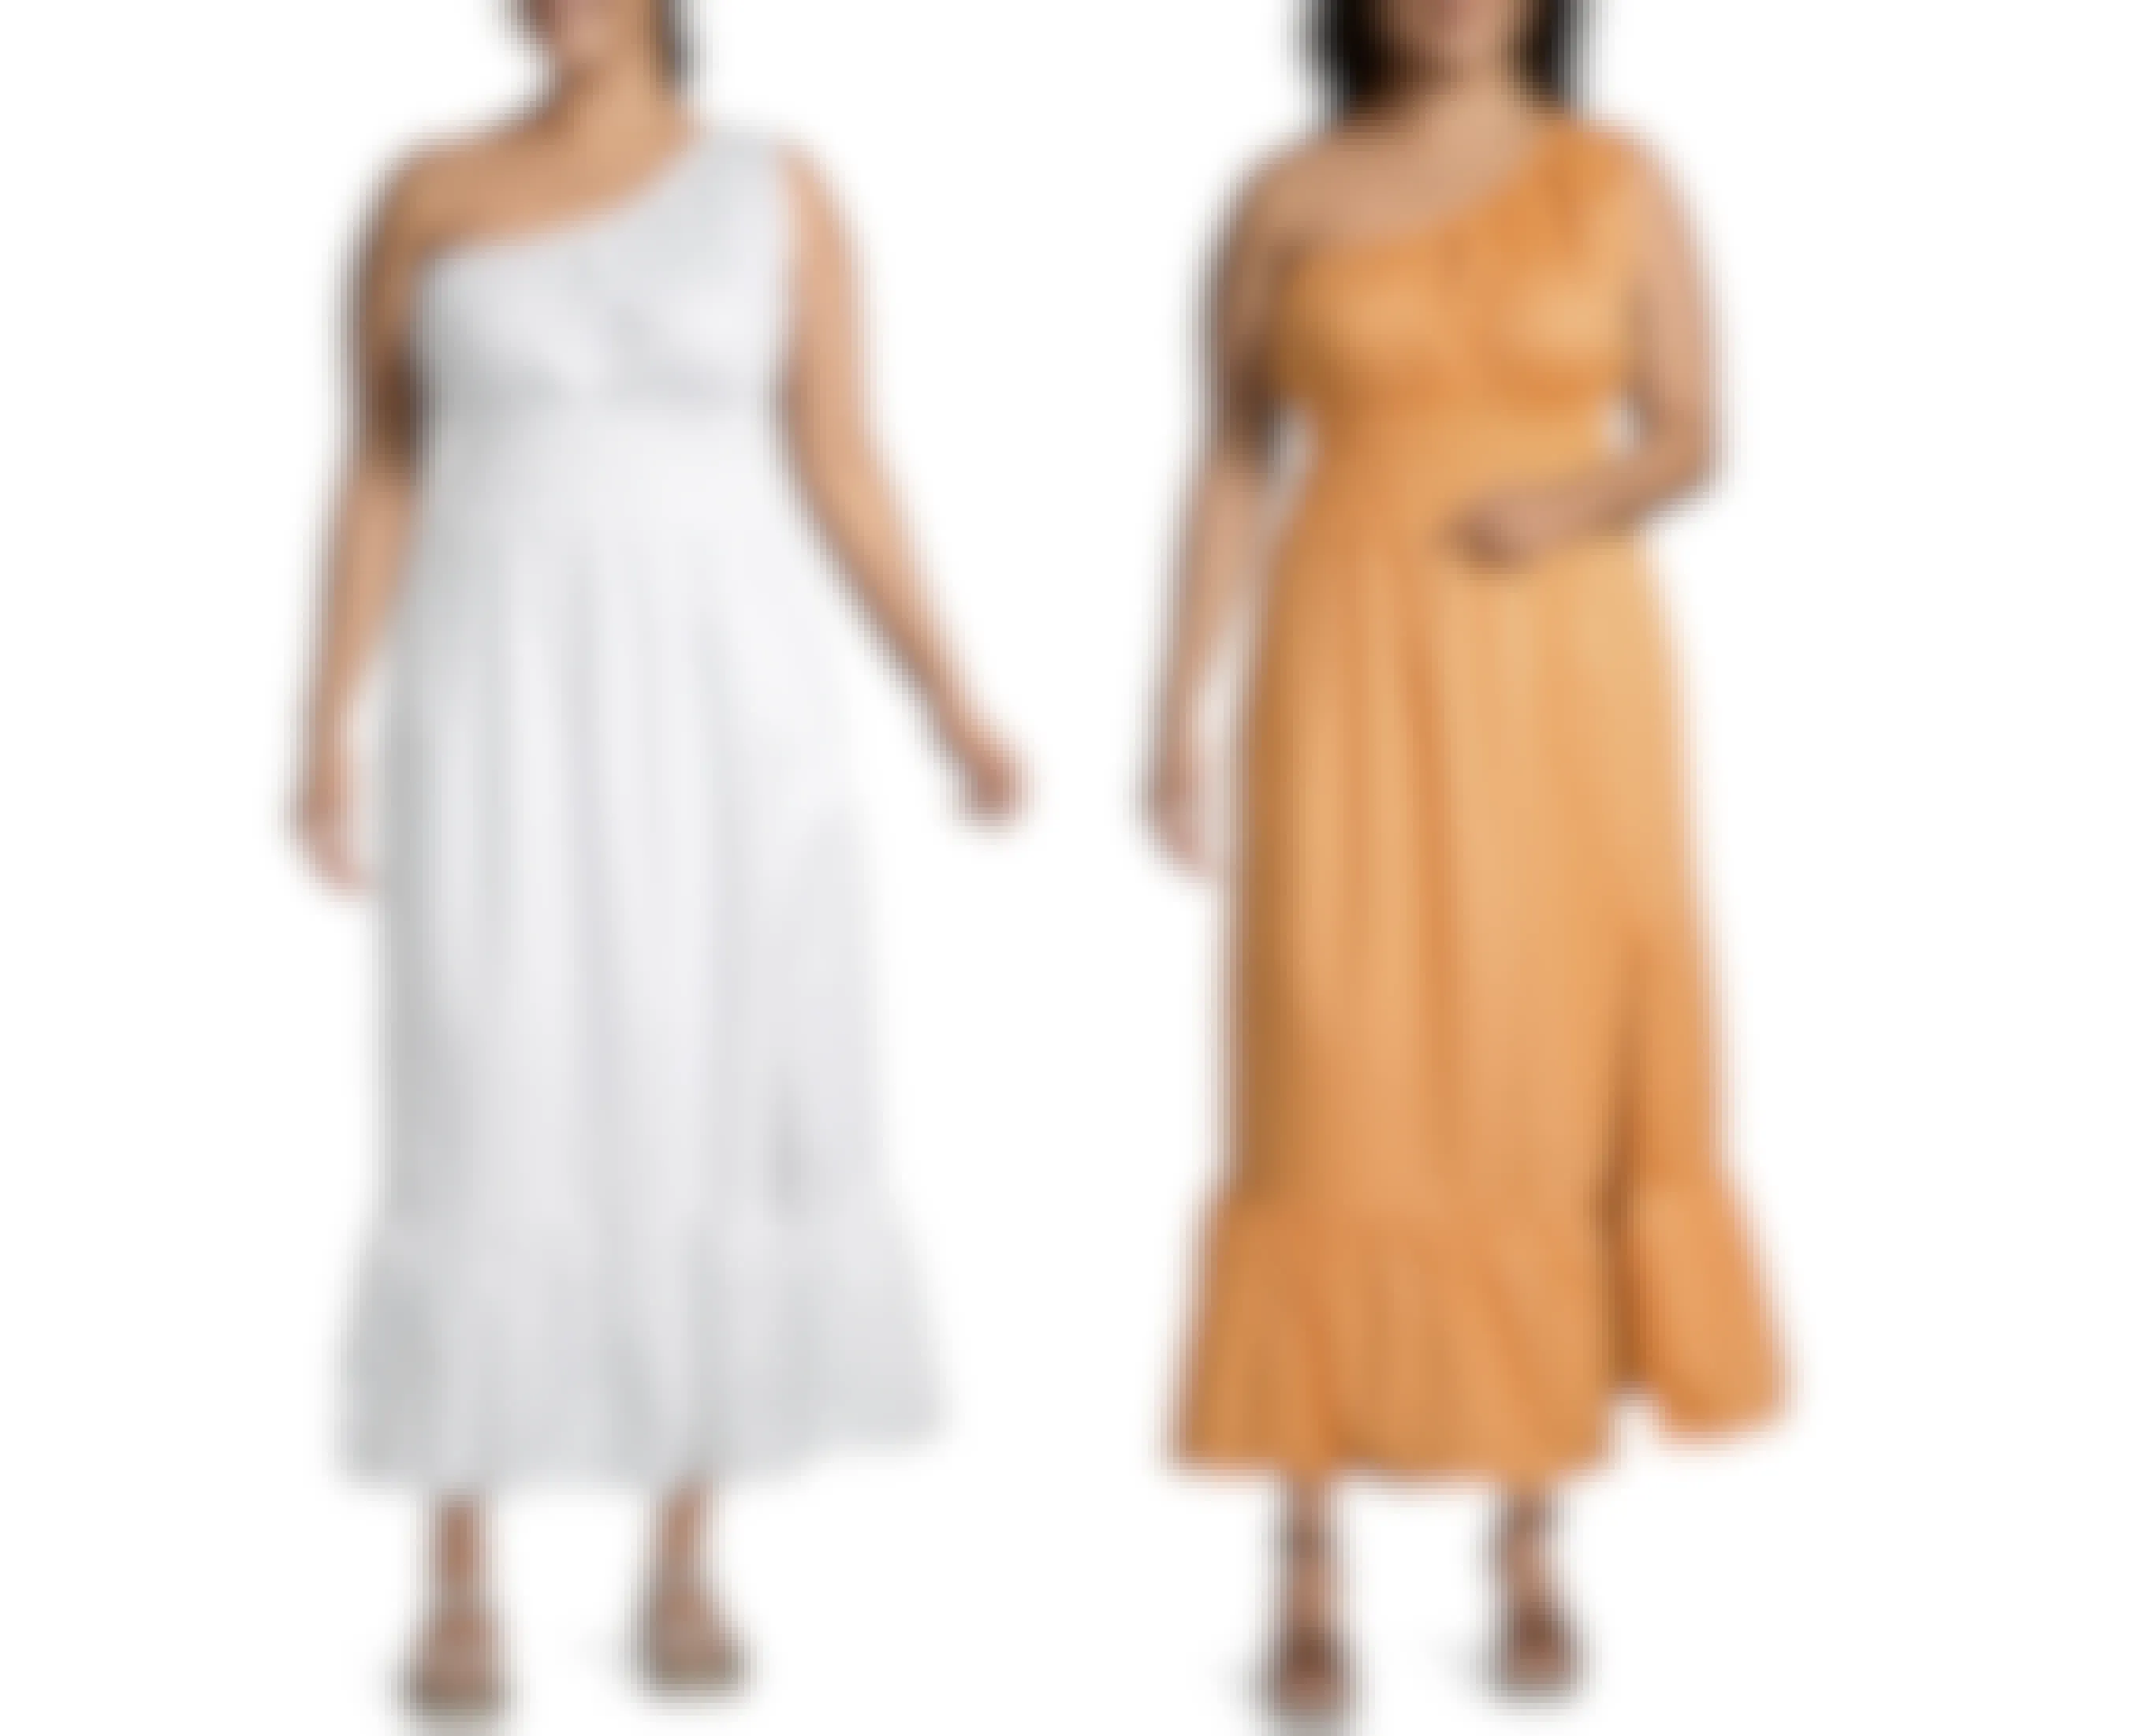 A JCPenney model wearing an a.n.a Plus Sleeveless Maxi Dress on a white background.